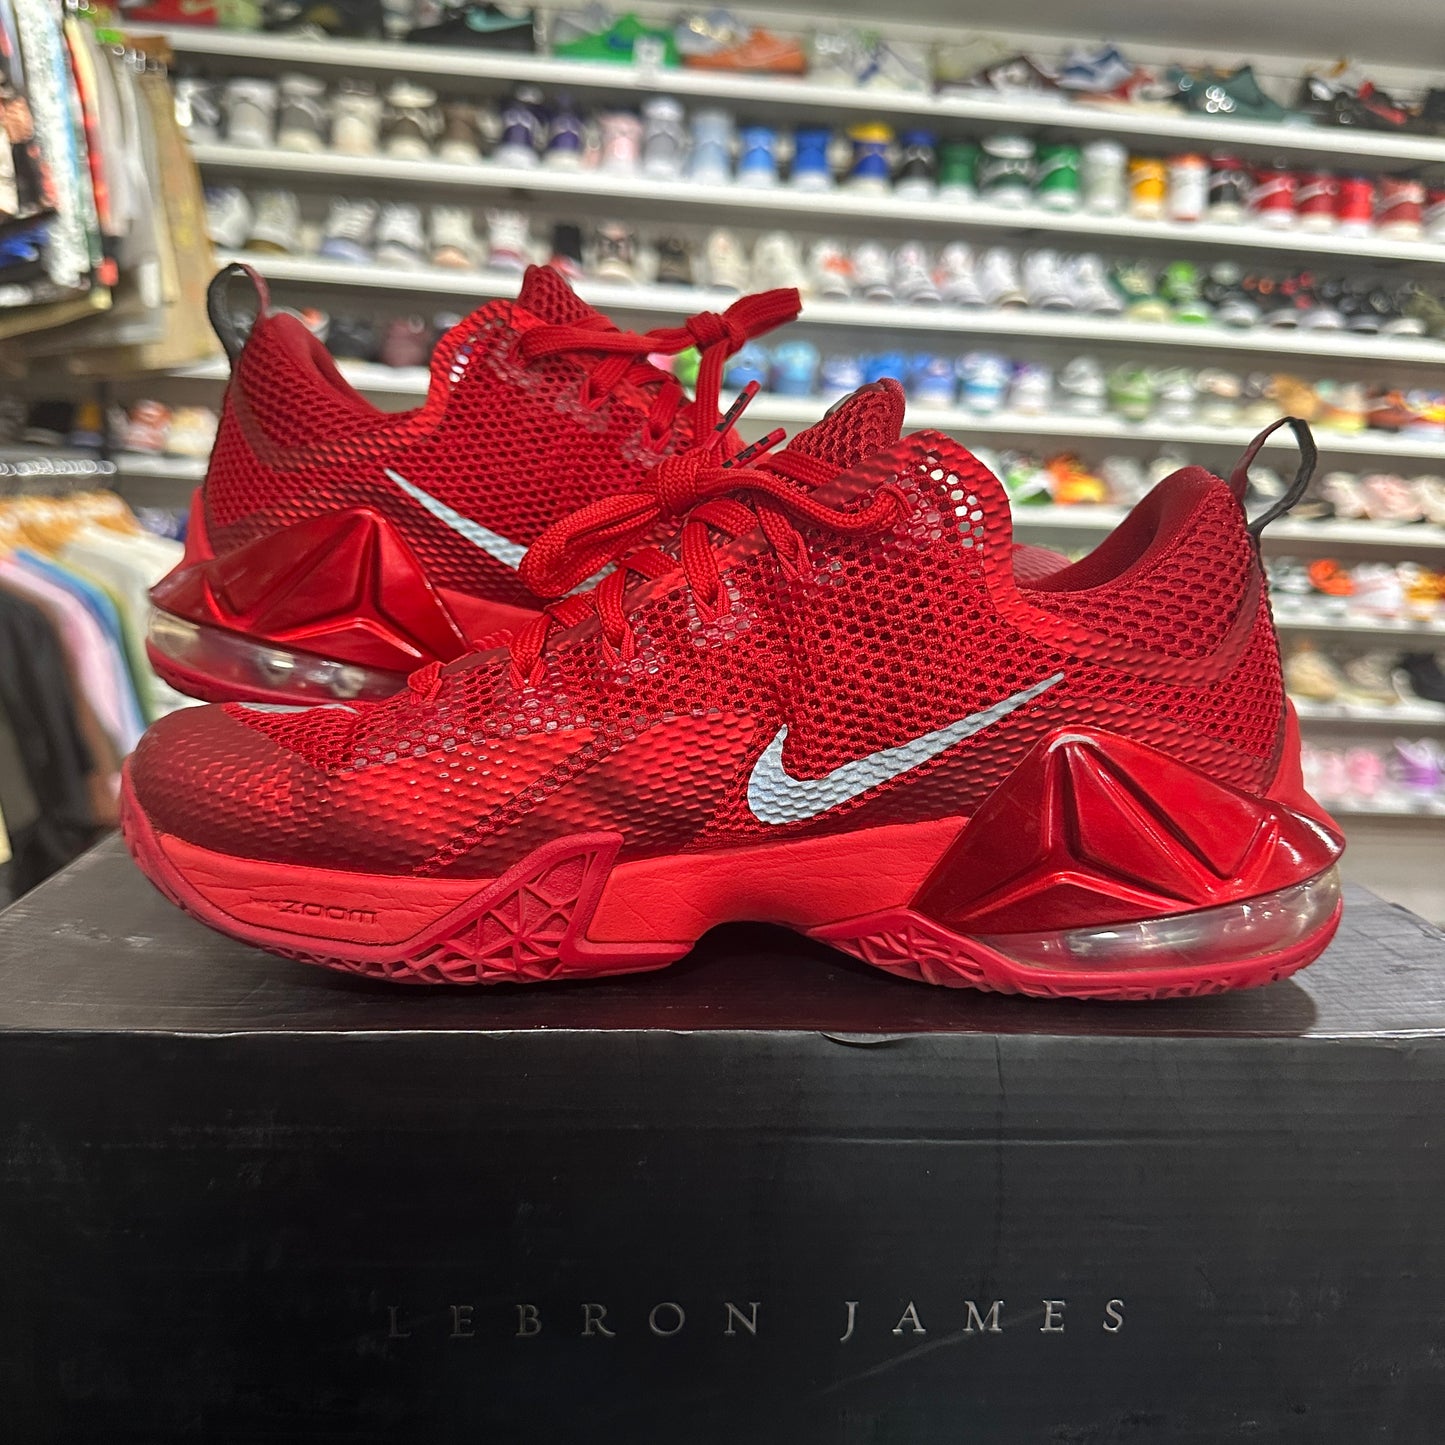 *USED* Lebron 12 Low University Red (size 9)